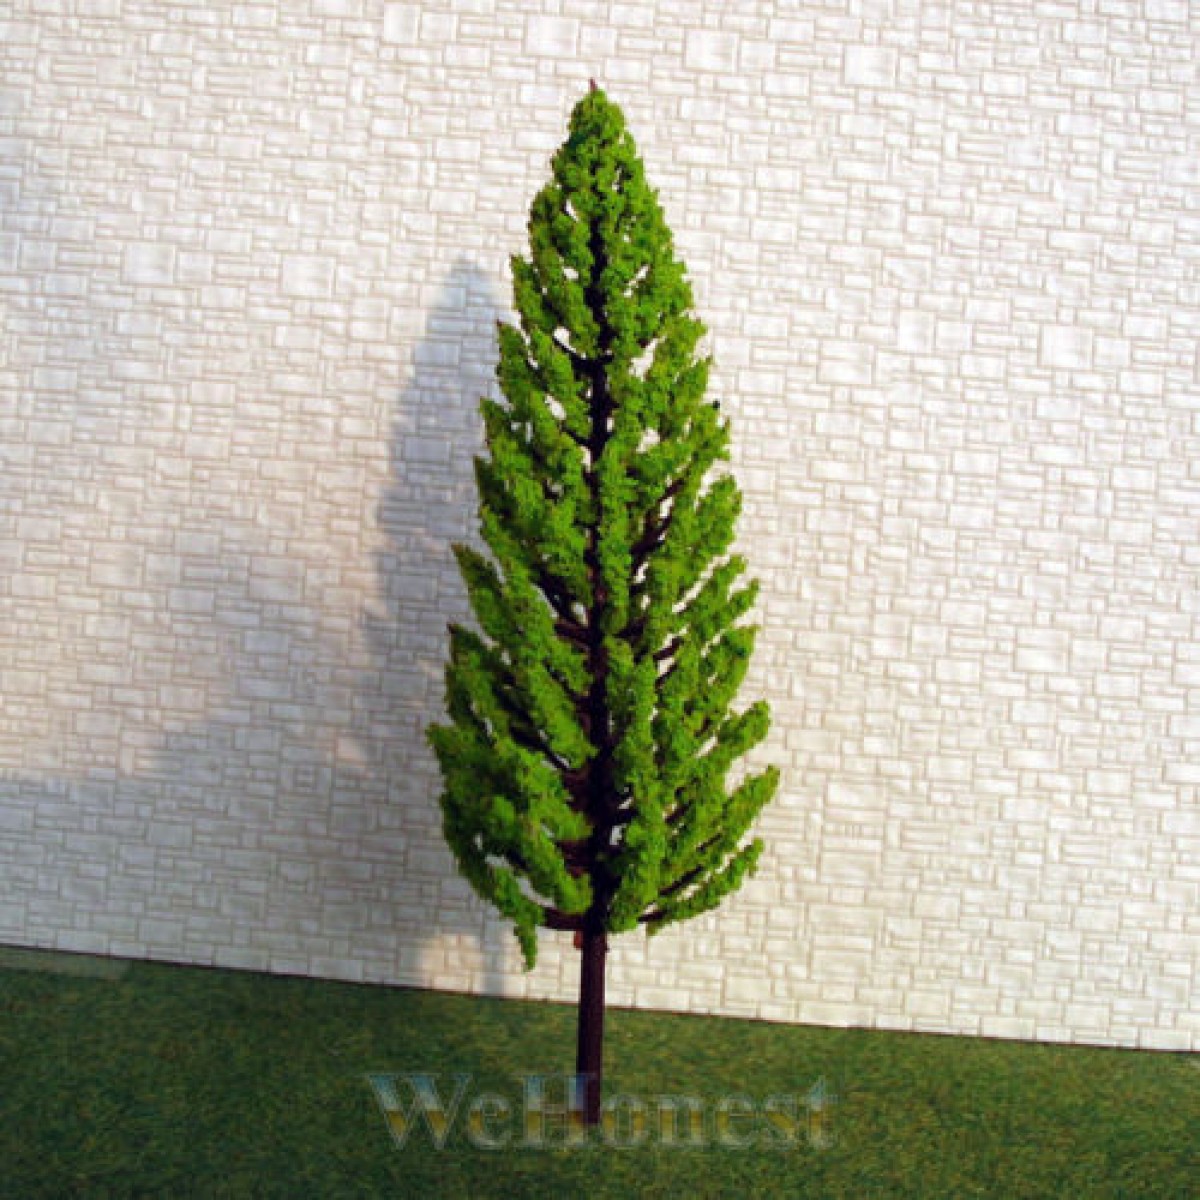 5  x  G scale  1:32  Pine  Trees  Bright  Green #C16060  (WeHonest)